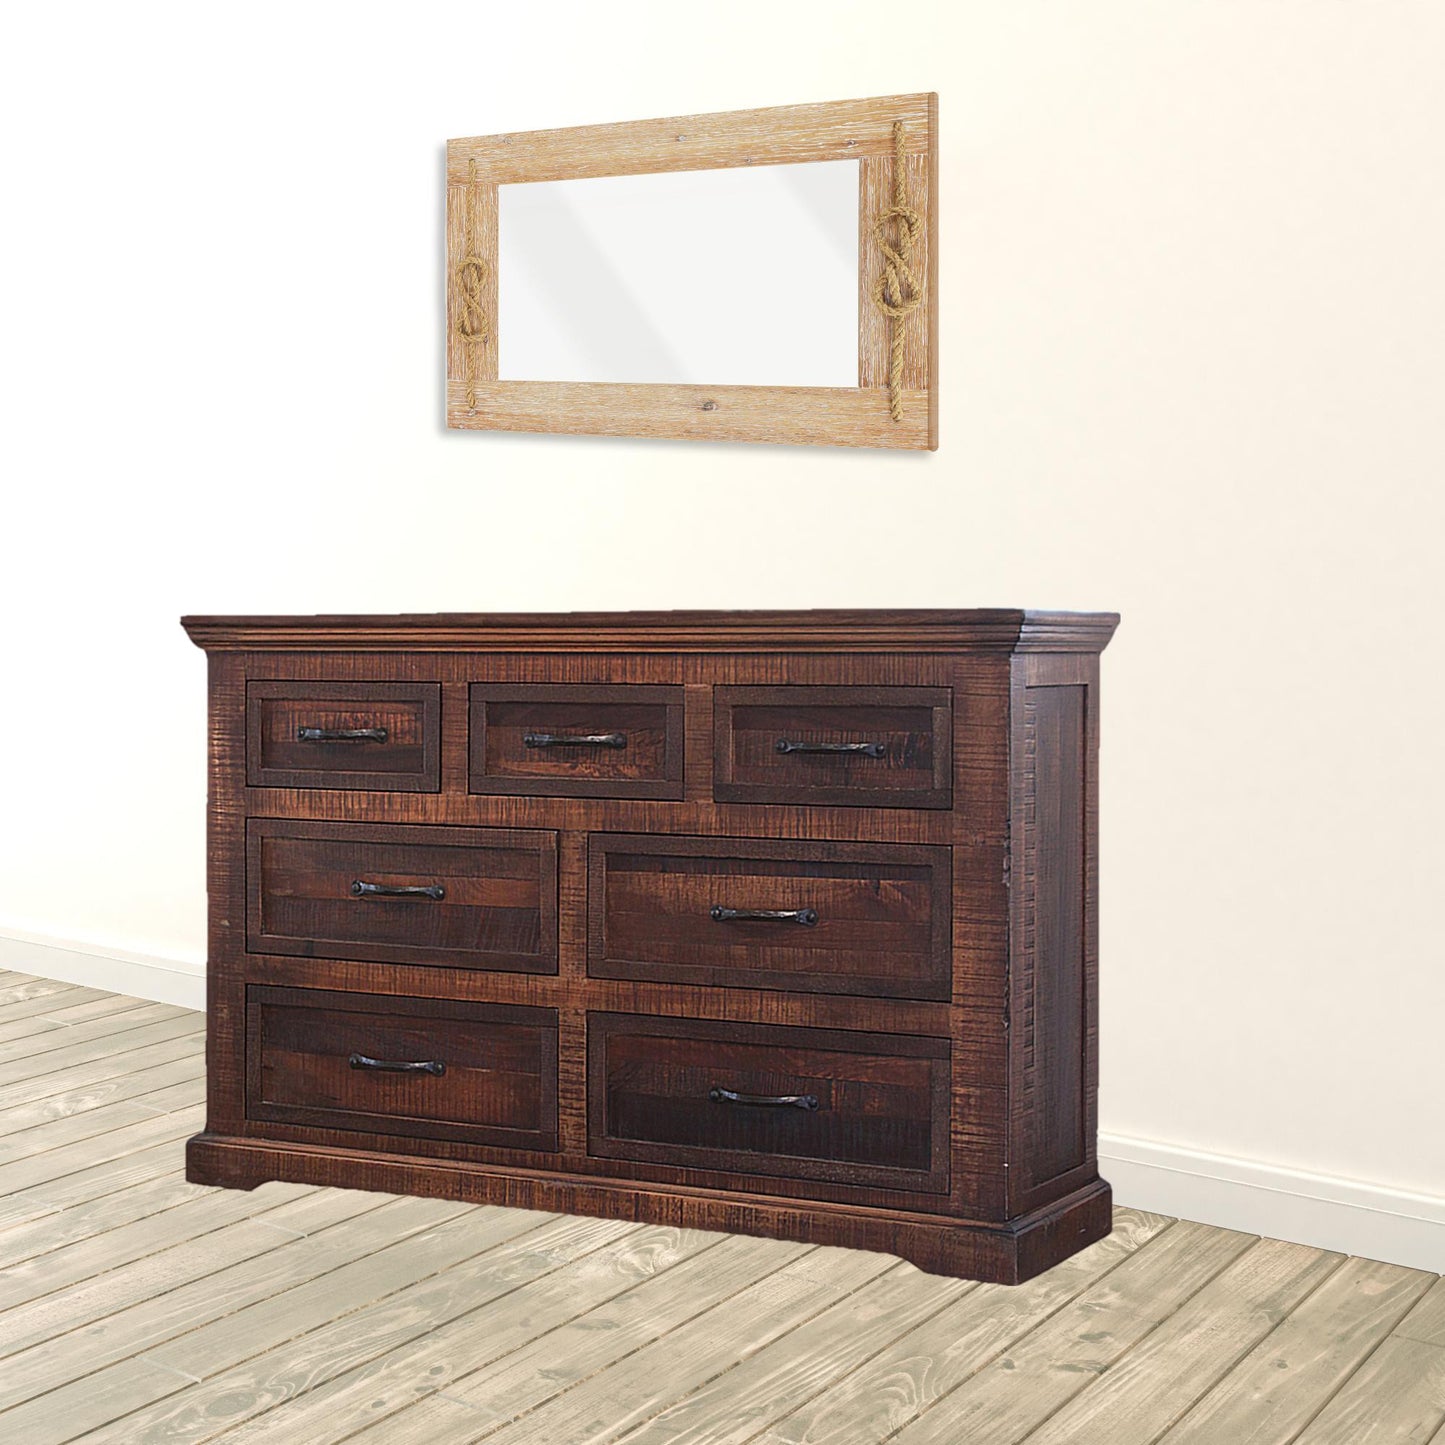 61" Brown Solid Wood Seven Drawer Double Dresser